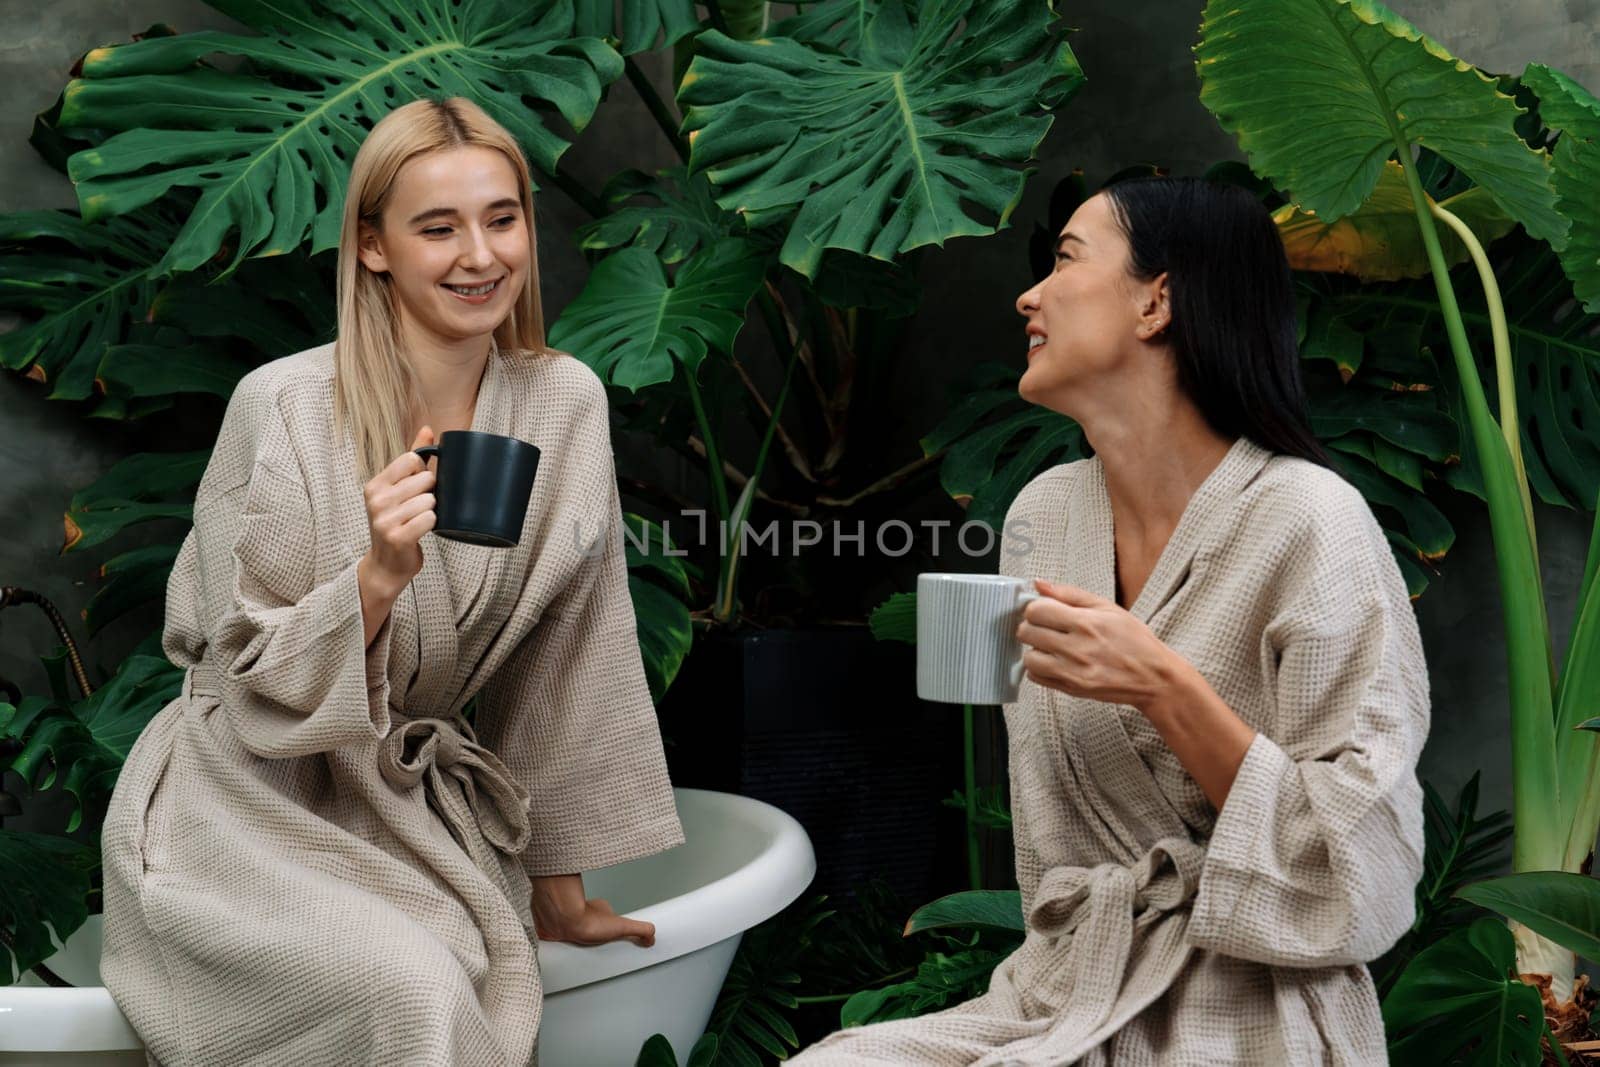 Tropical and exotic spa garden with bathtub in modern hotel or resort with young two women in bathrobe drink coffee, enjoy leisure and wellness lifestyle surround by lush greenery foliage. Blithe